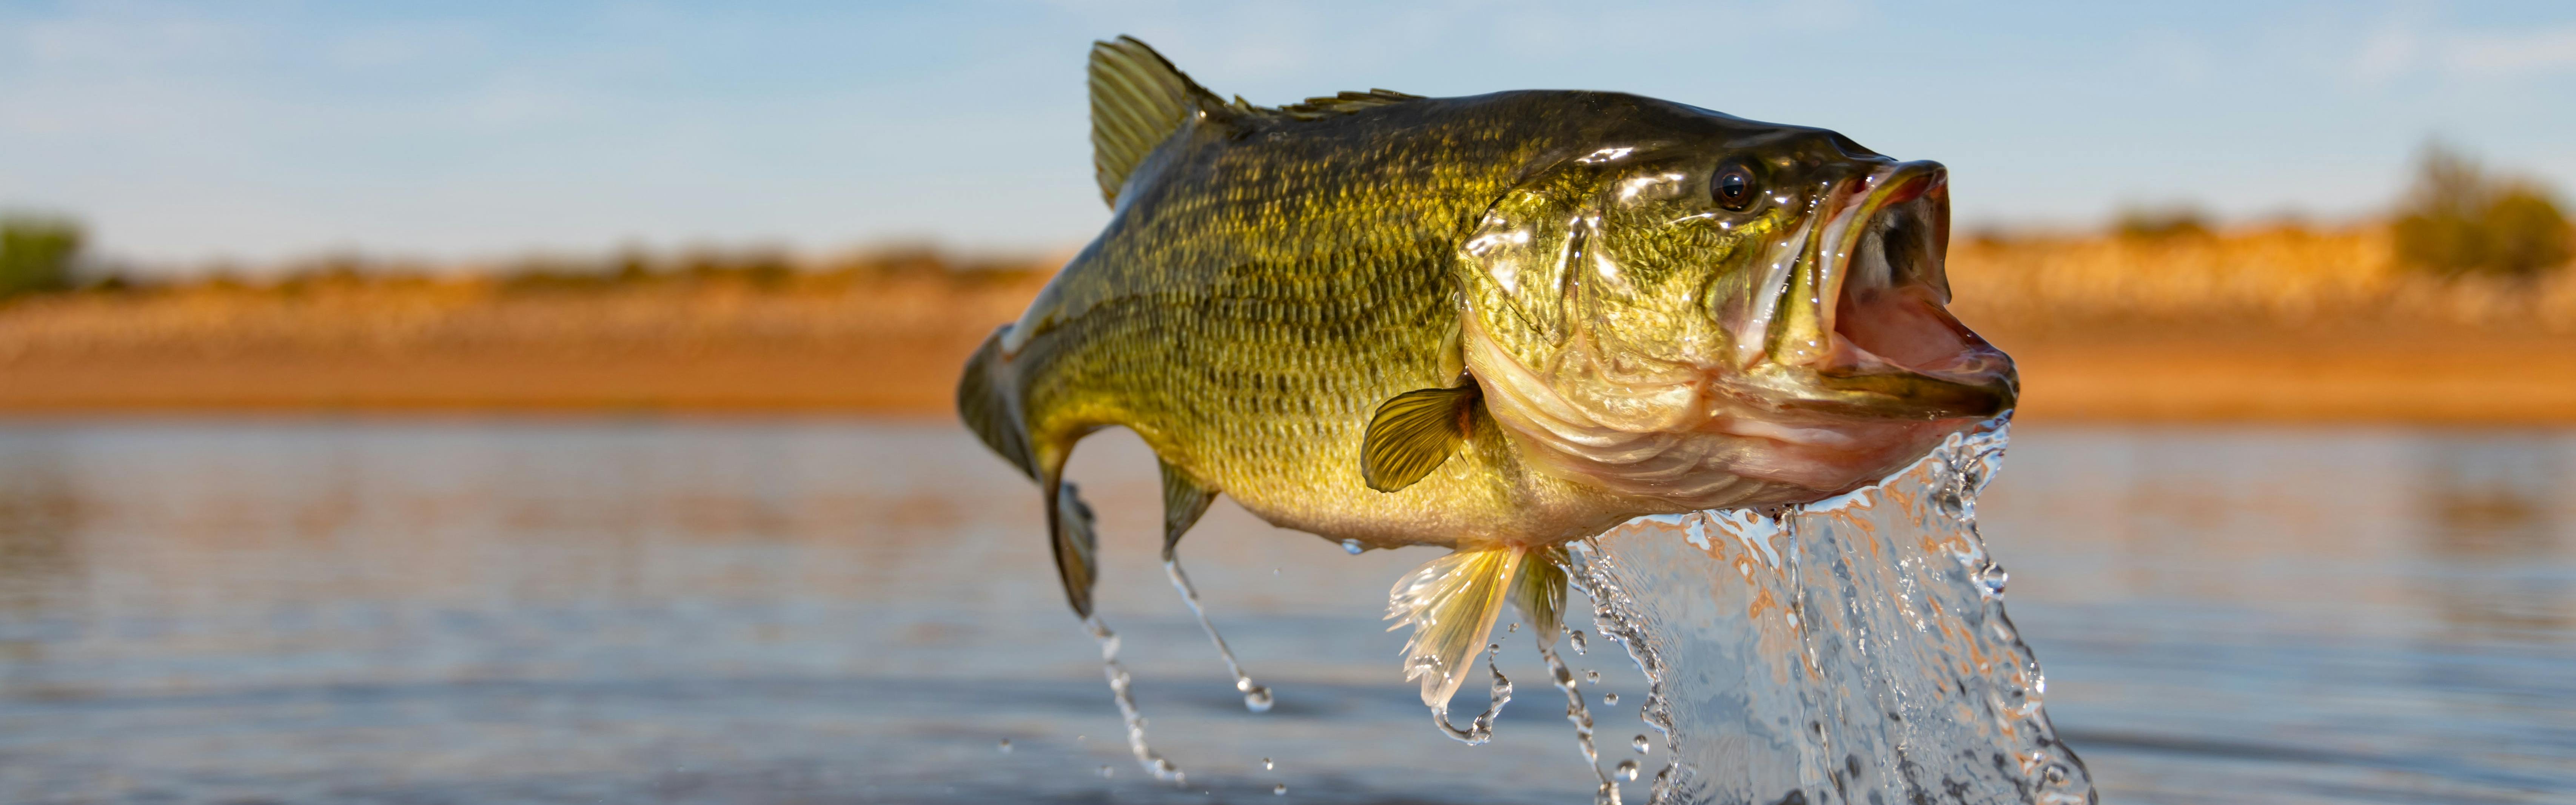 The Different Types of Bass: Largemouth Bass vs. Smallmouth Bass